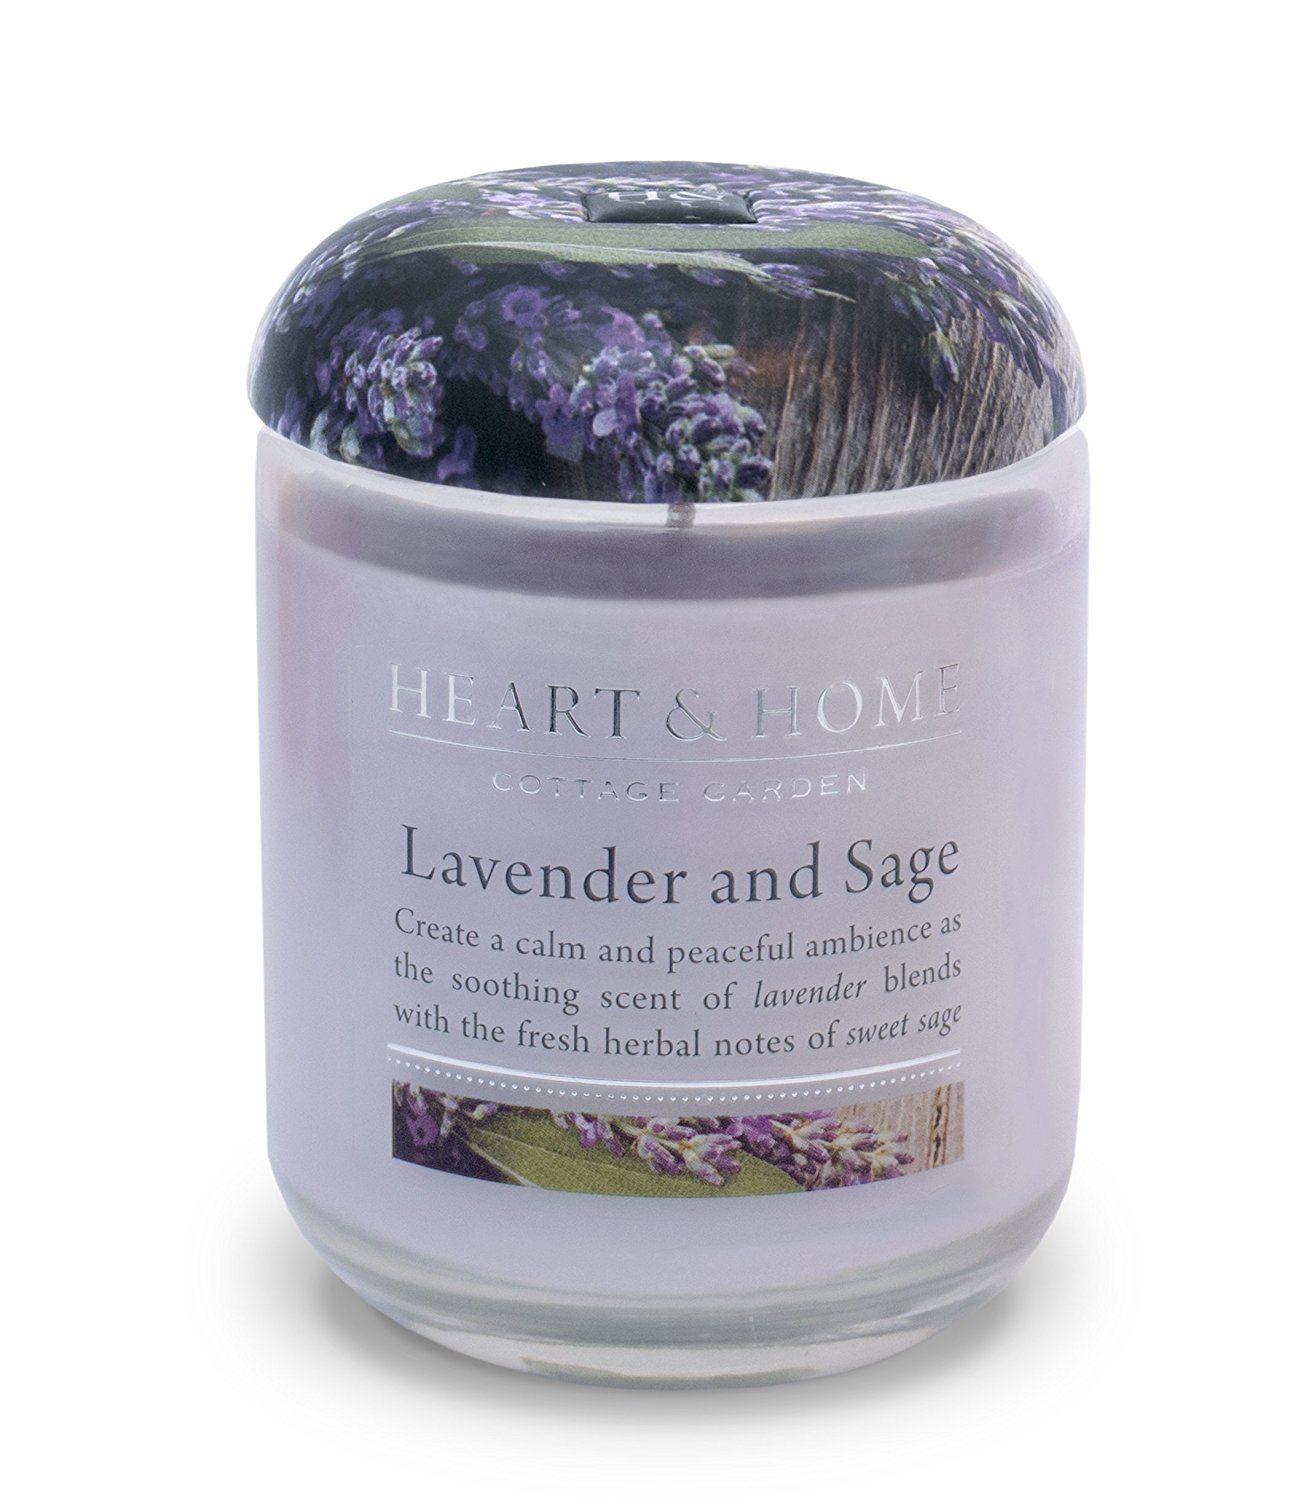 Lumanare - Lavender and Sage - Large | Heart and Home